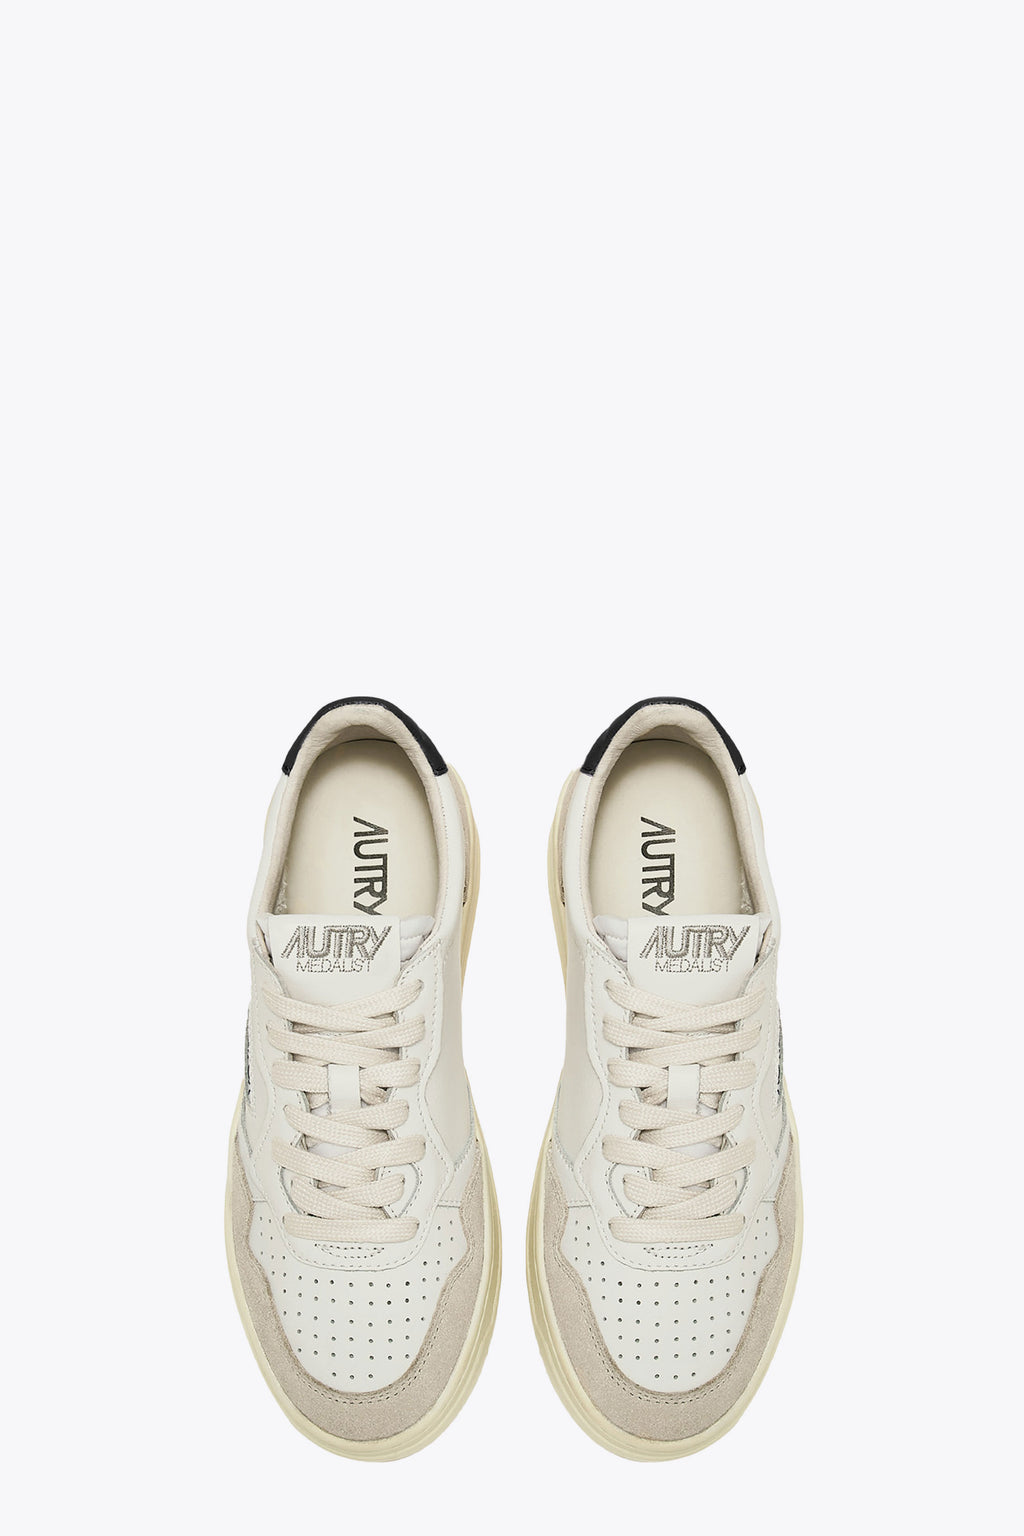 alt-image__White-leather-low-sneaker-with-suede-detail-and-black-tab---Medalist